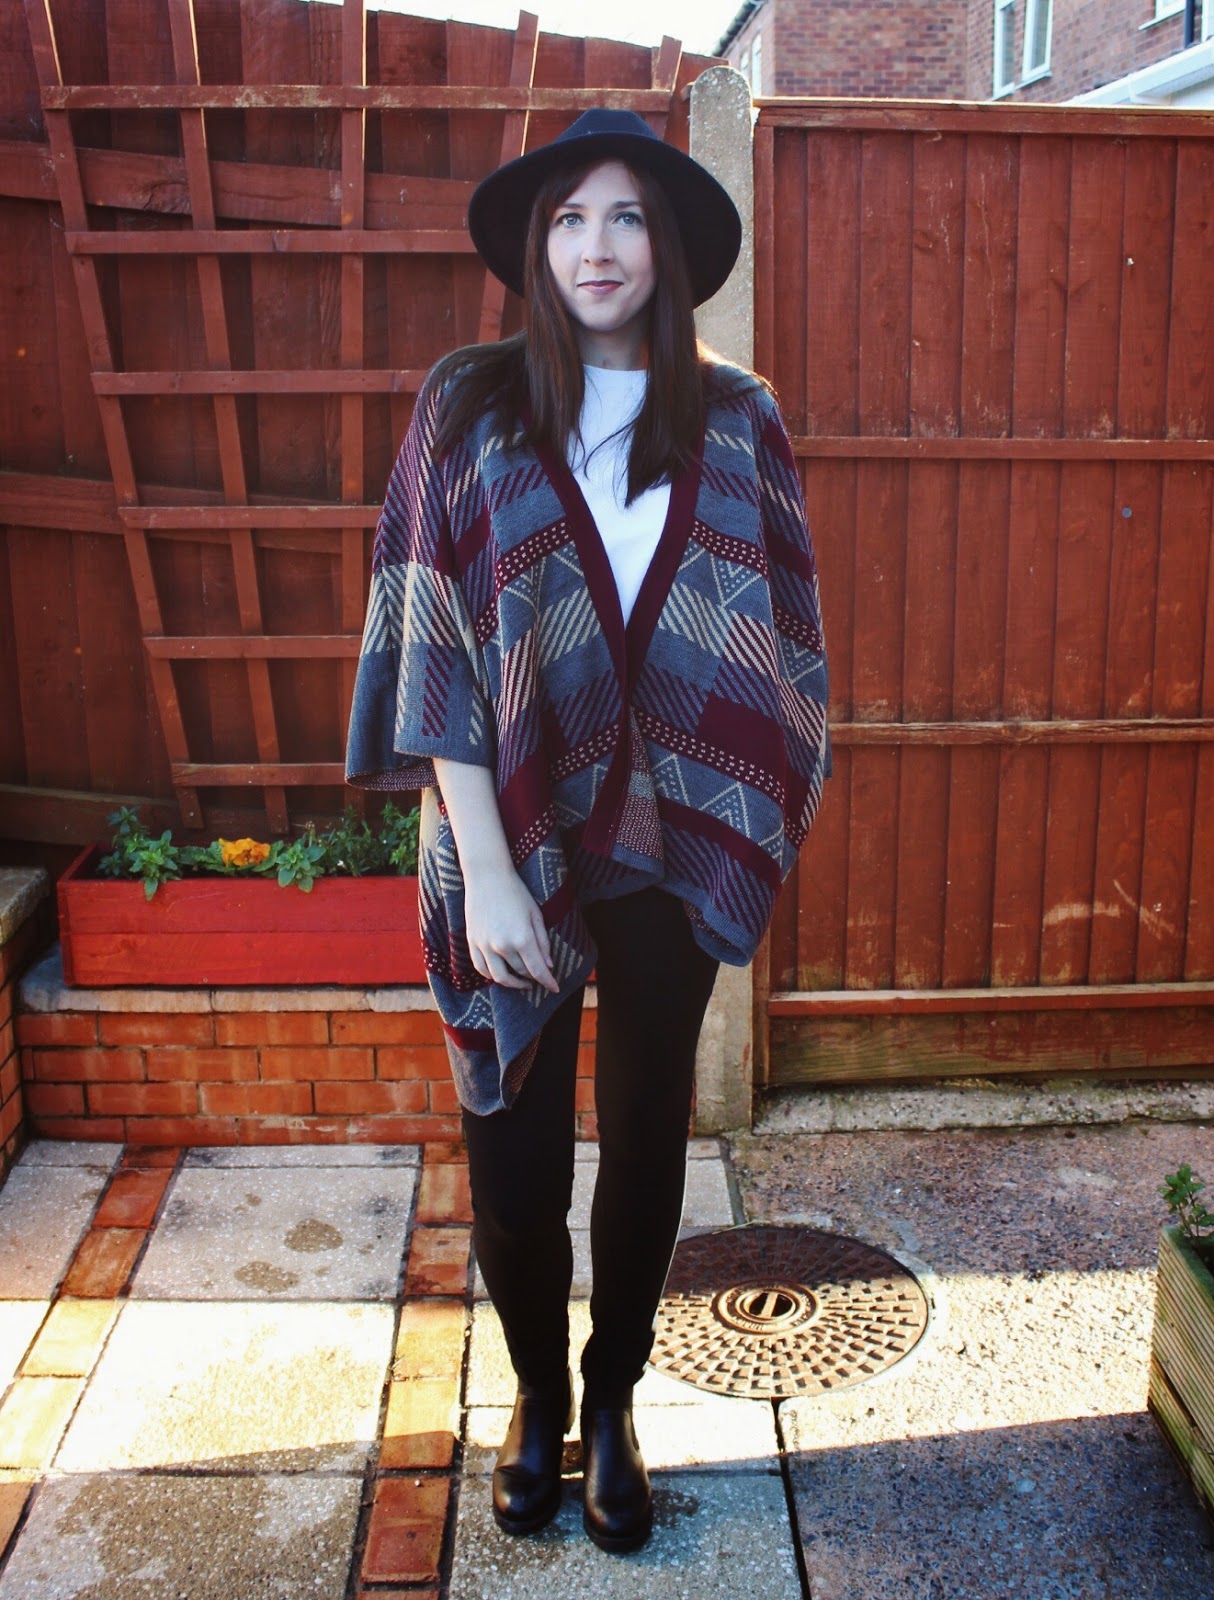 ASOS, asseenonme, cape, chelseaboots, fashionblogger, fashionbloggers, fblogger, fbloggers, lookoftheday, lotd, ootd, outfitoftheday, primark, style, whatimwearing, winter, wiw